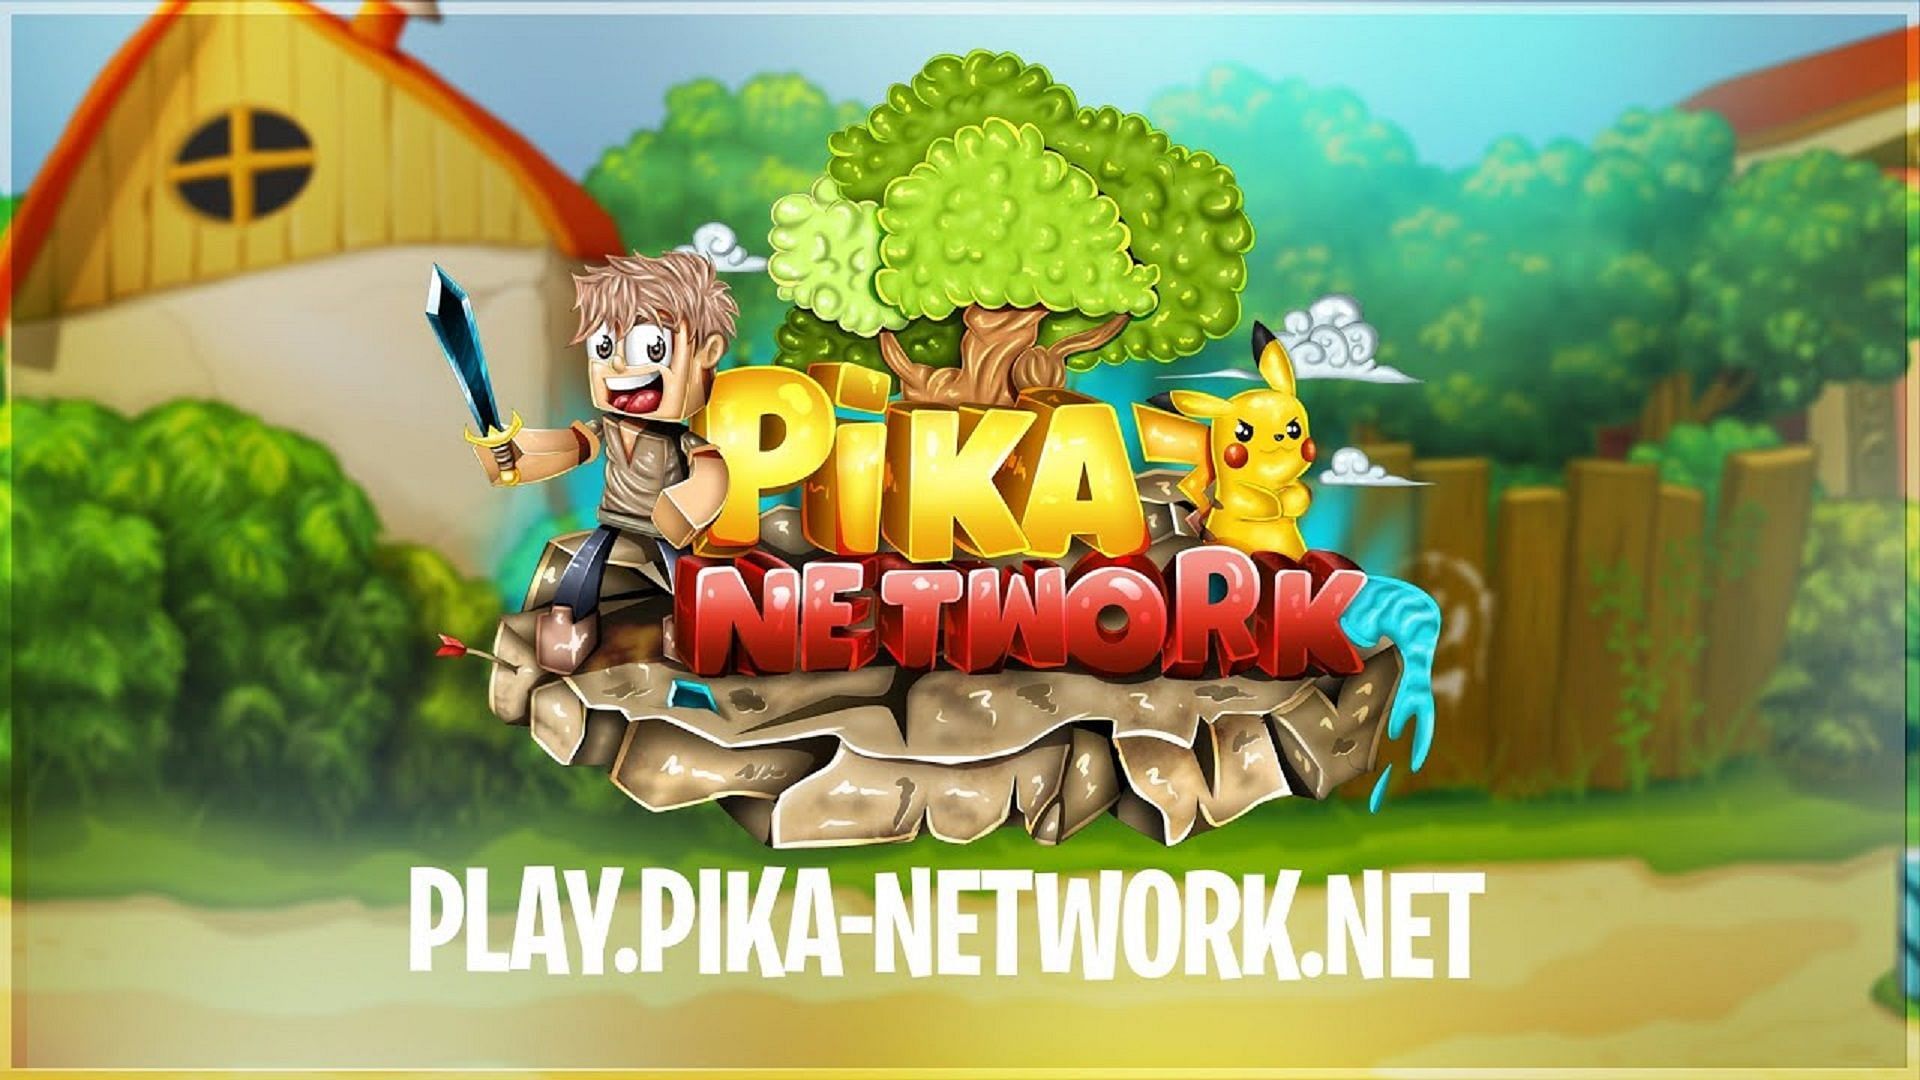 Pika Network&#039;s official logo (Image via Pikanetwork/Youtube)